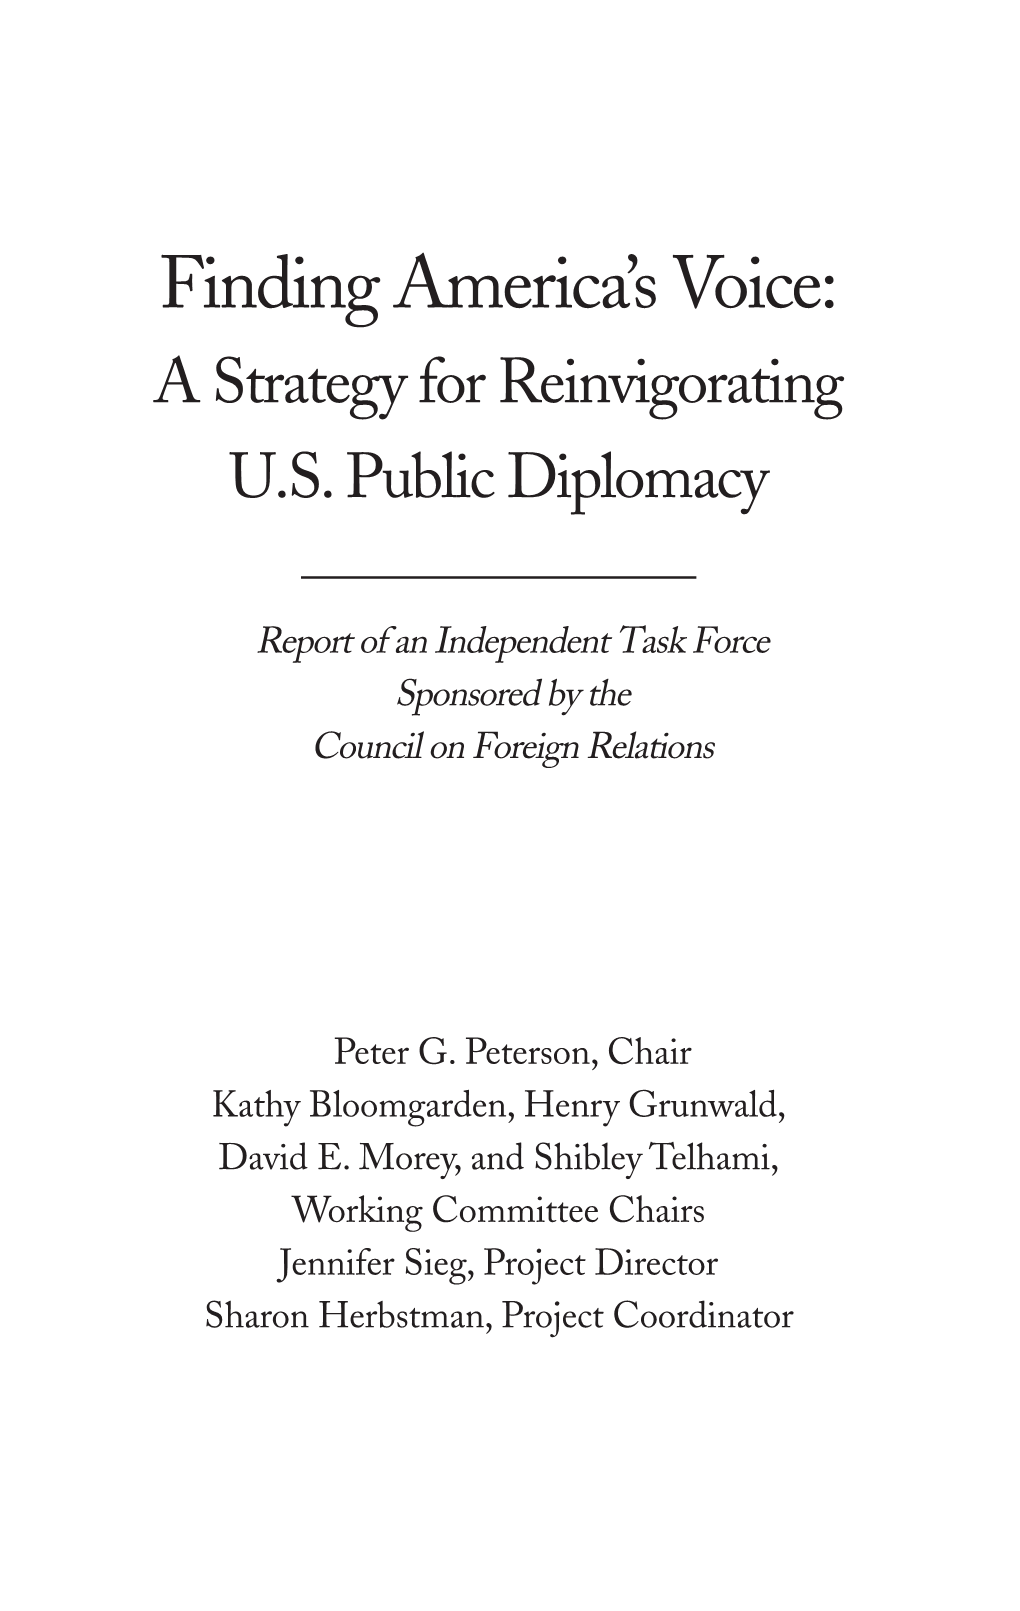 A Strategy for Reinvigorating US Public Diplomacy